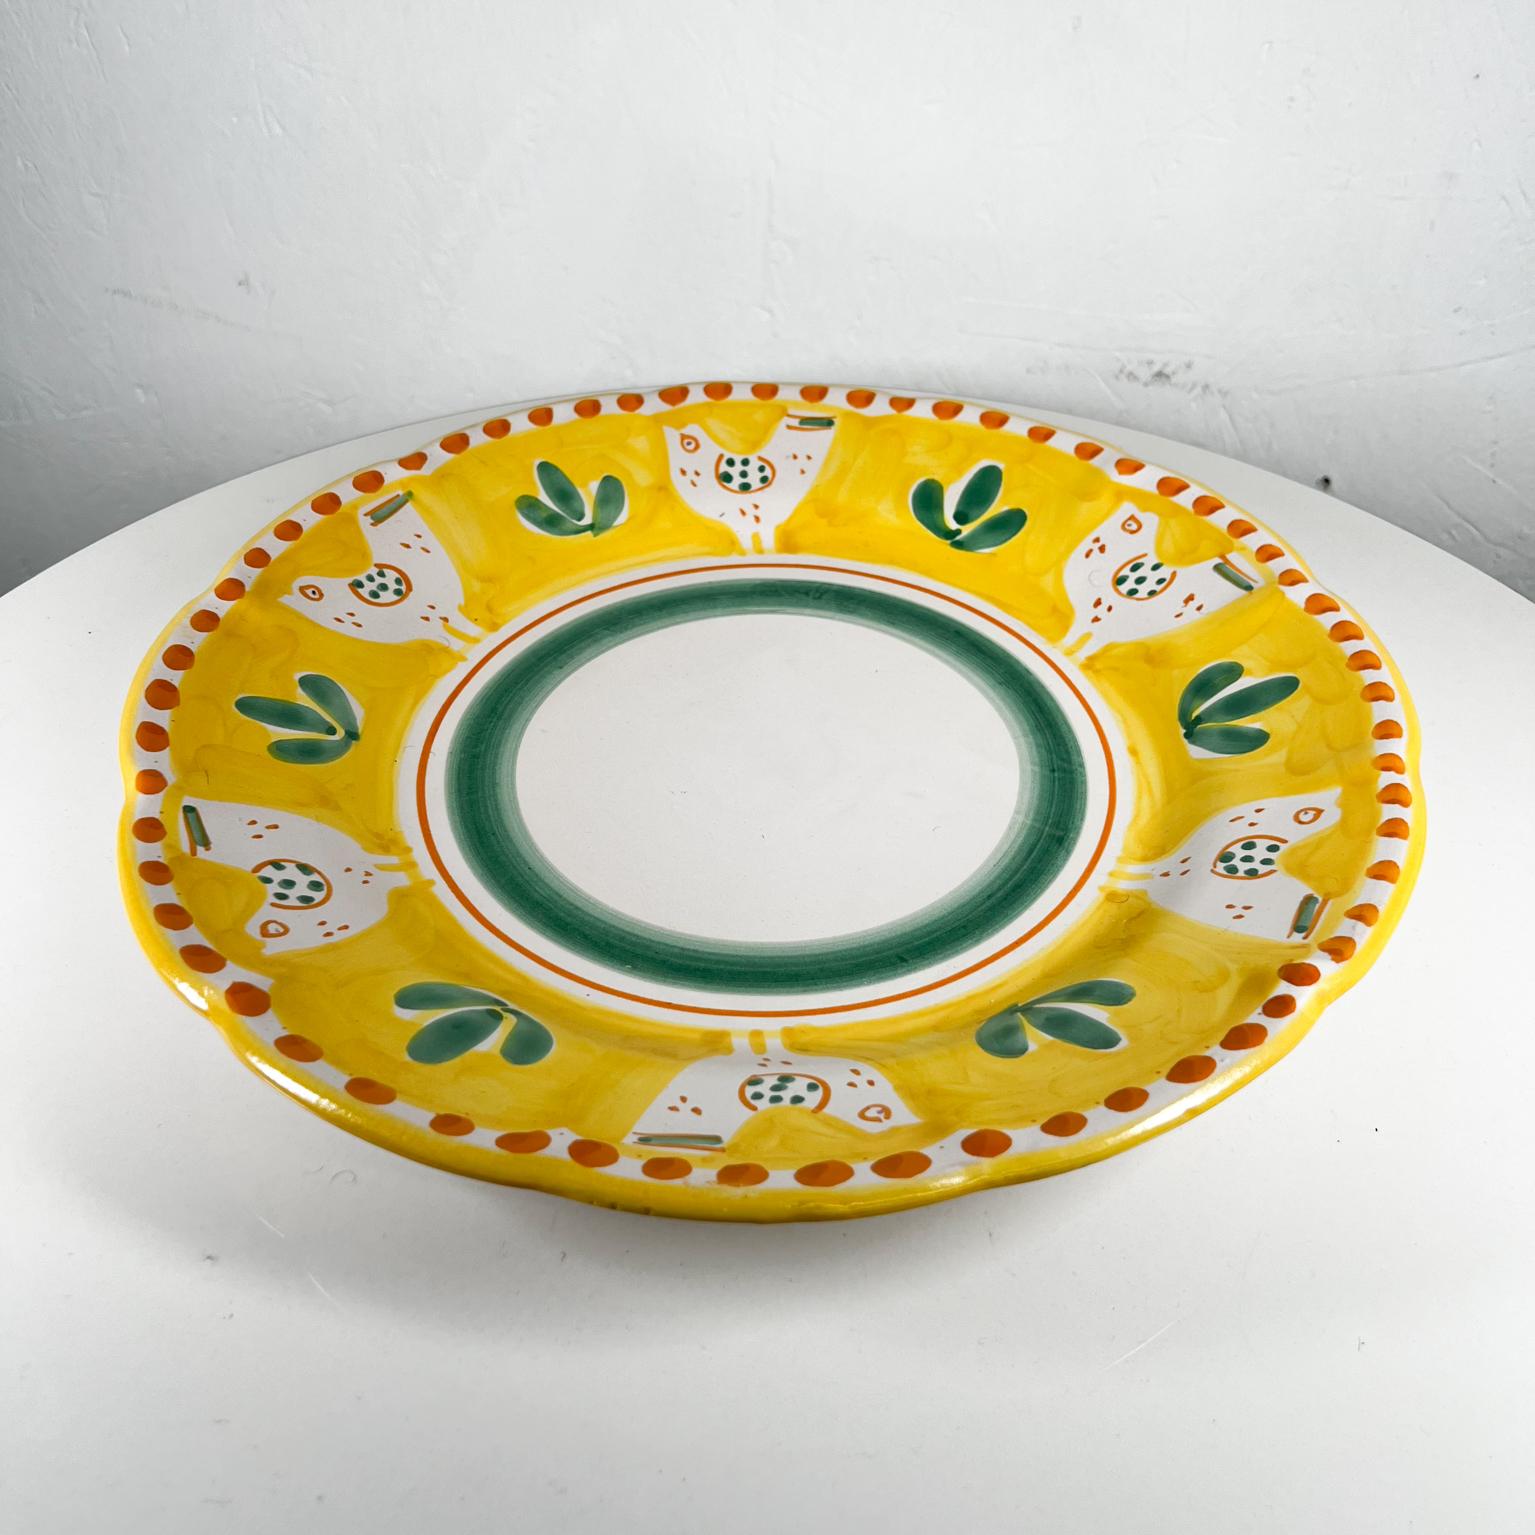 1980s Solimene Vietri Hand Made Ceramica decorative plate yellow chicks Italy
13.5 x 2 tall
Flat platter (large) in yellow green tones
Signed Solimene Italy
Original vintage condition.
See images presented here.



